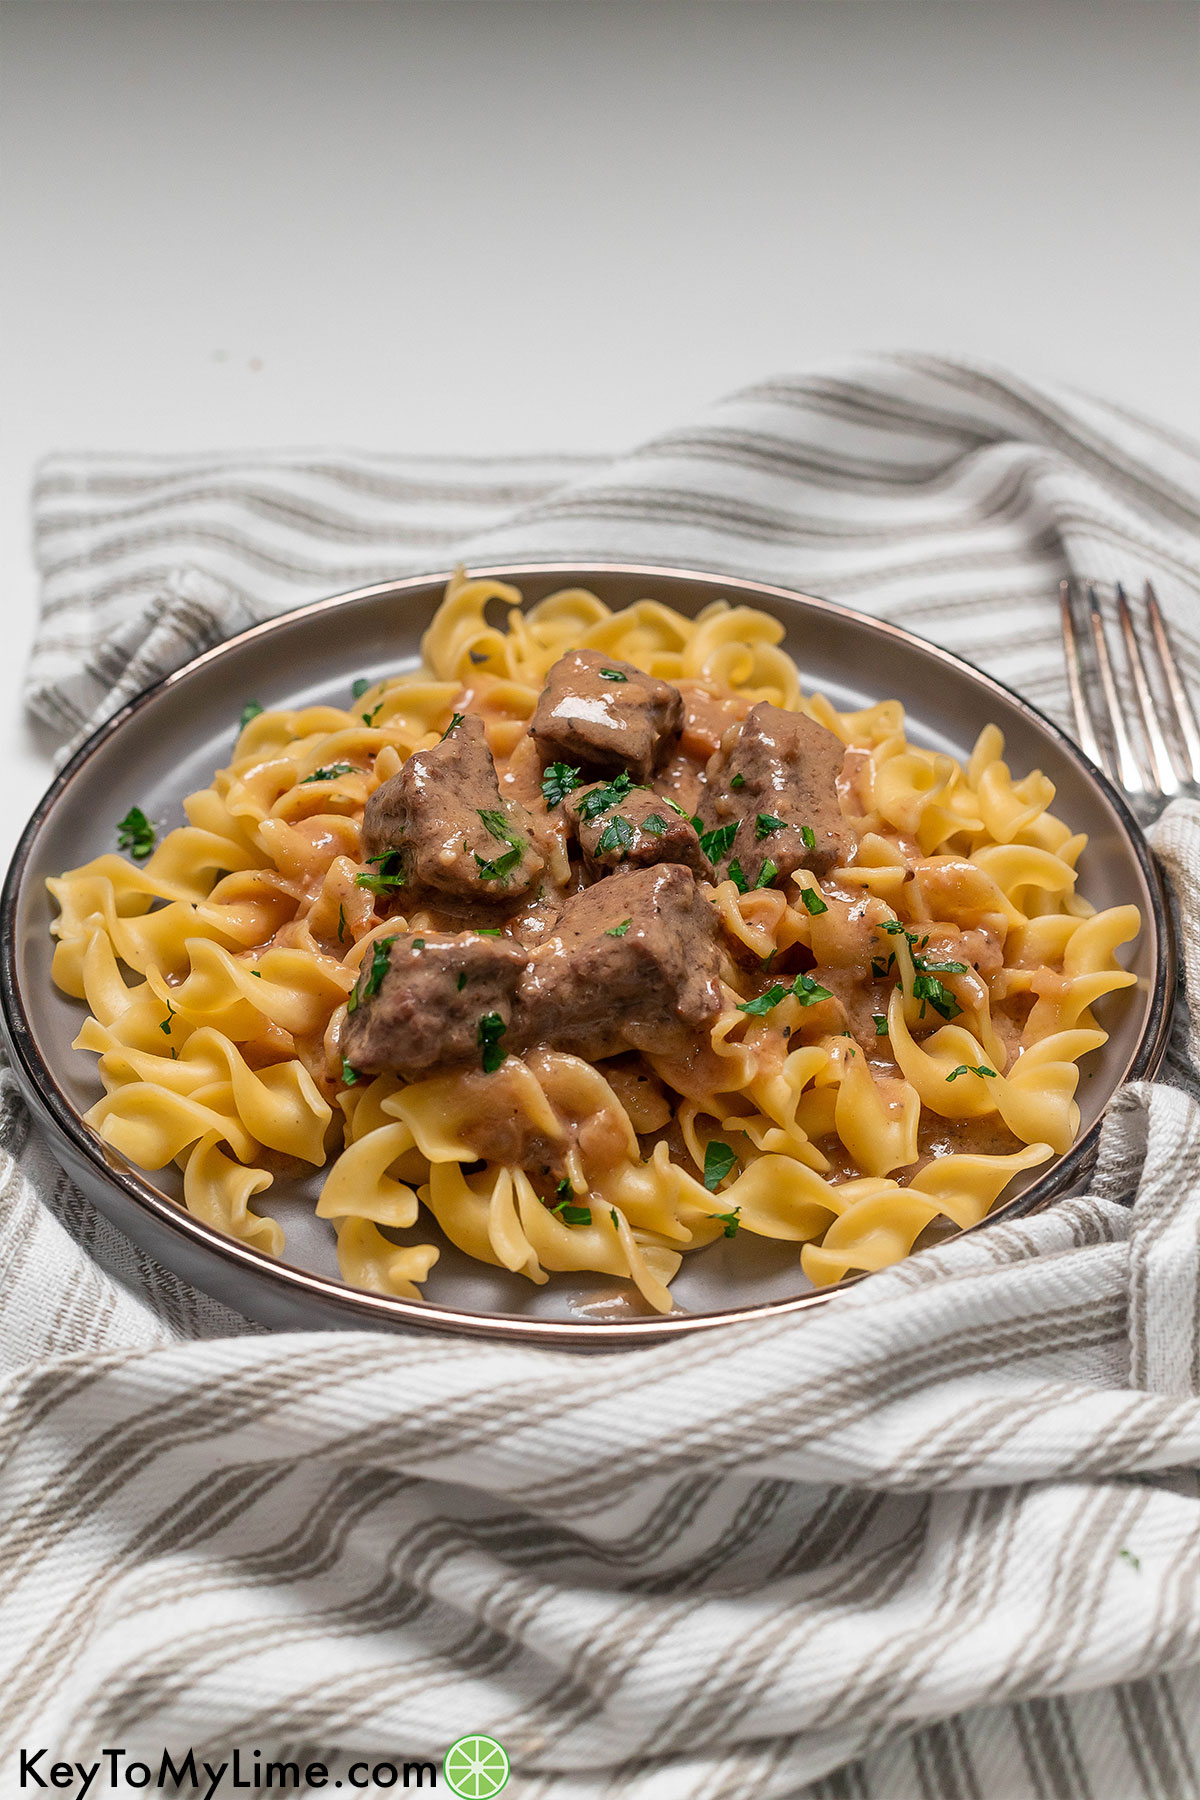 A side image showing the texture of the beef tips over a bed of egg noodles.